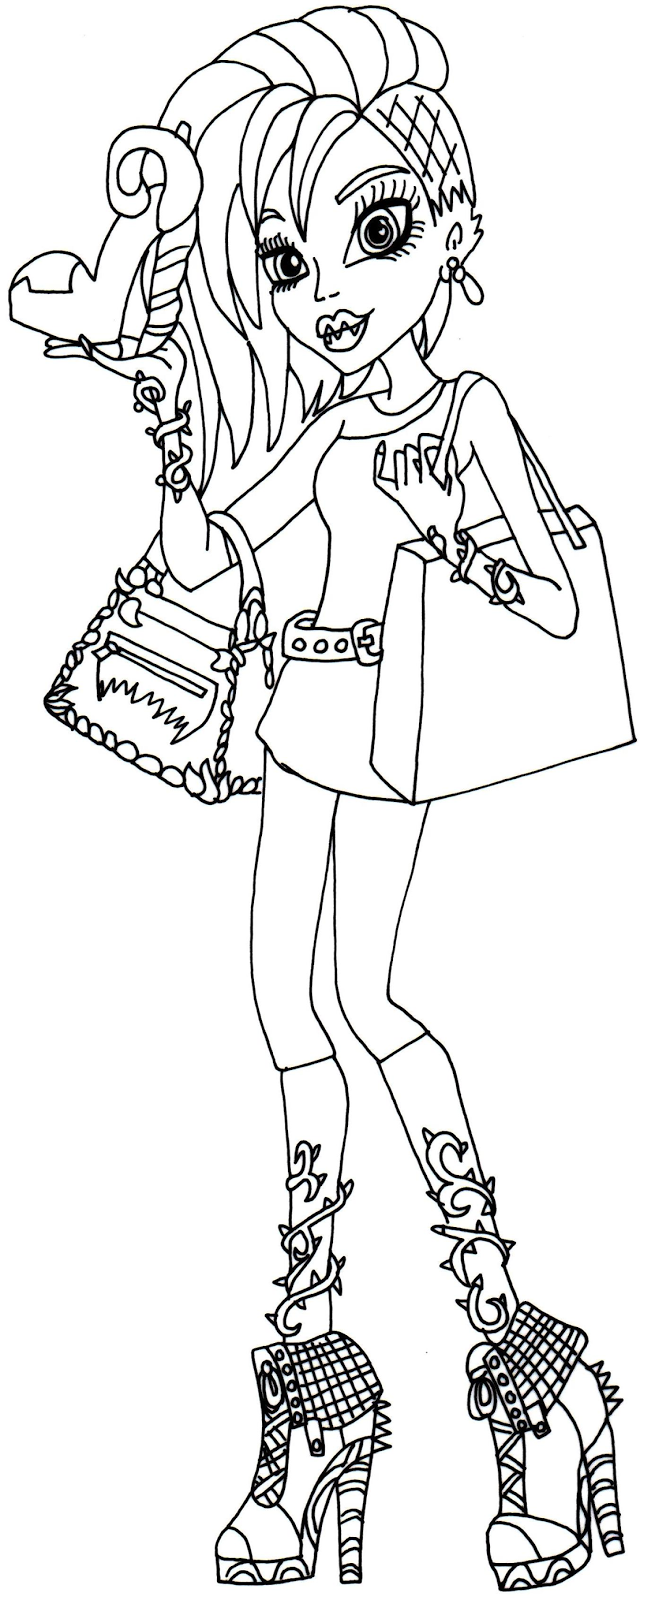 Free printable monster high coloring page for Venus McFlytrap in her I love fashion outfit